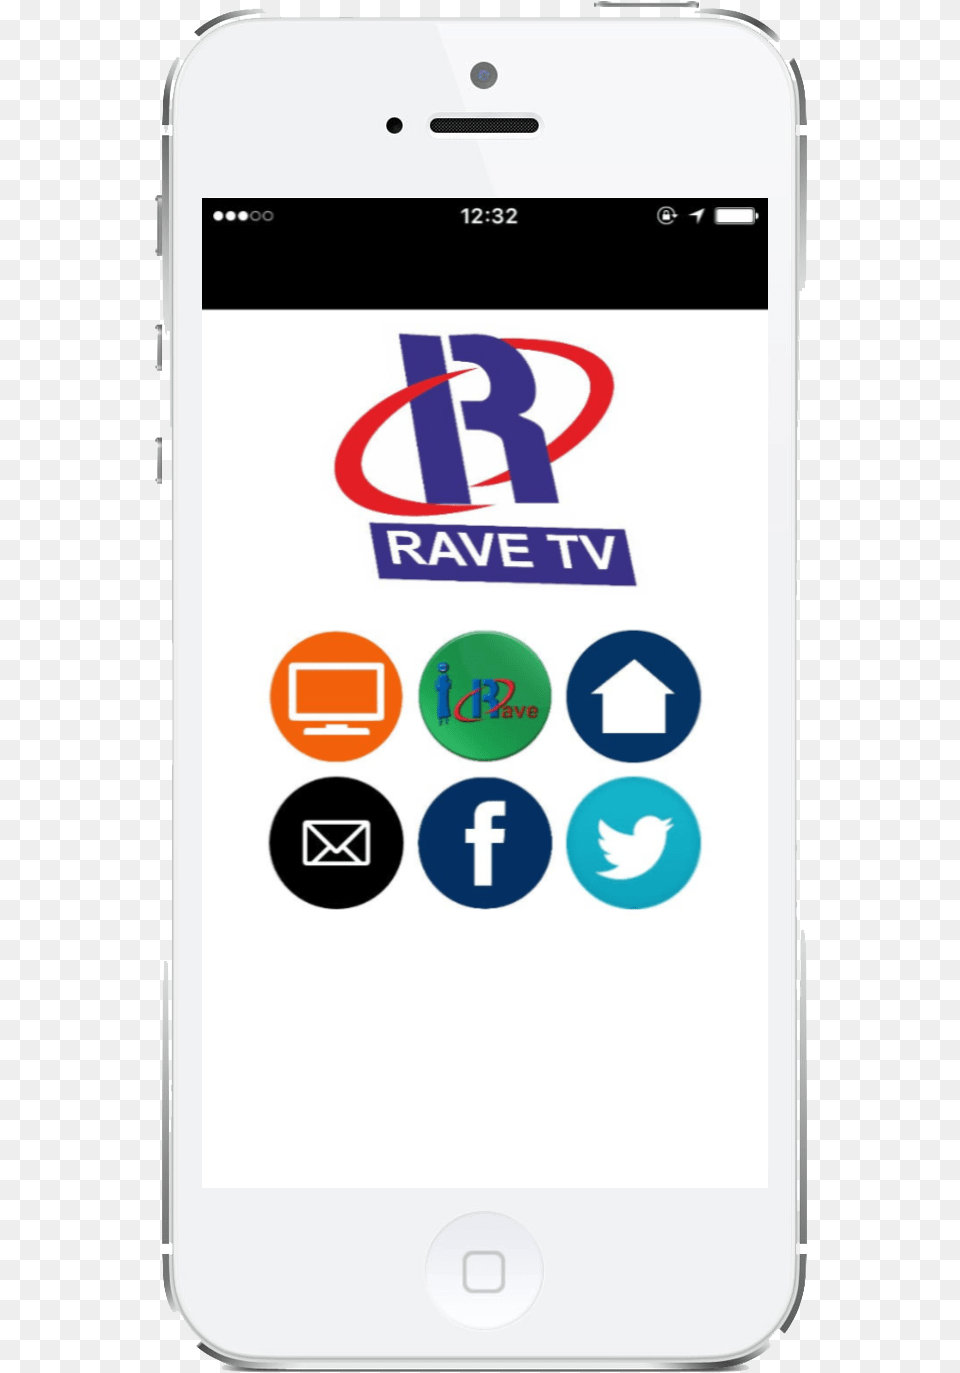 Ios App Ravetv Ios, Electronics, Mobile Phone, Phone Free Png Download